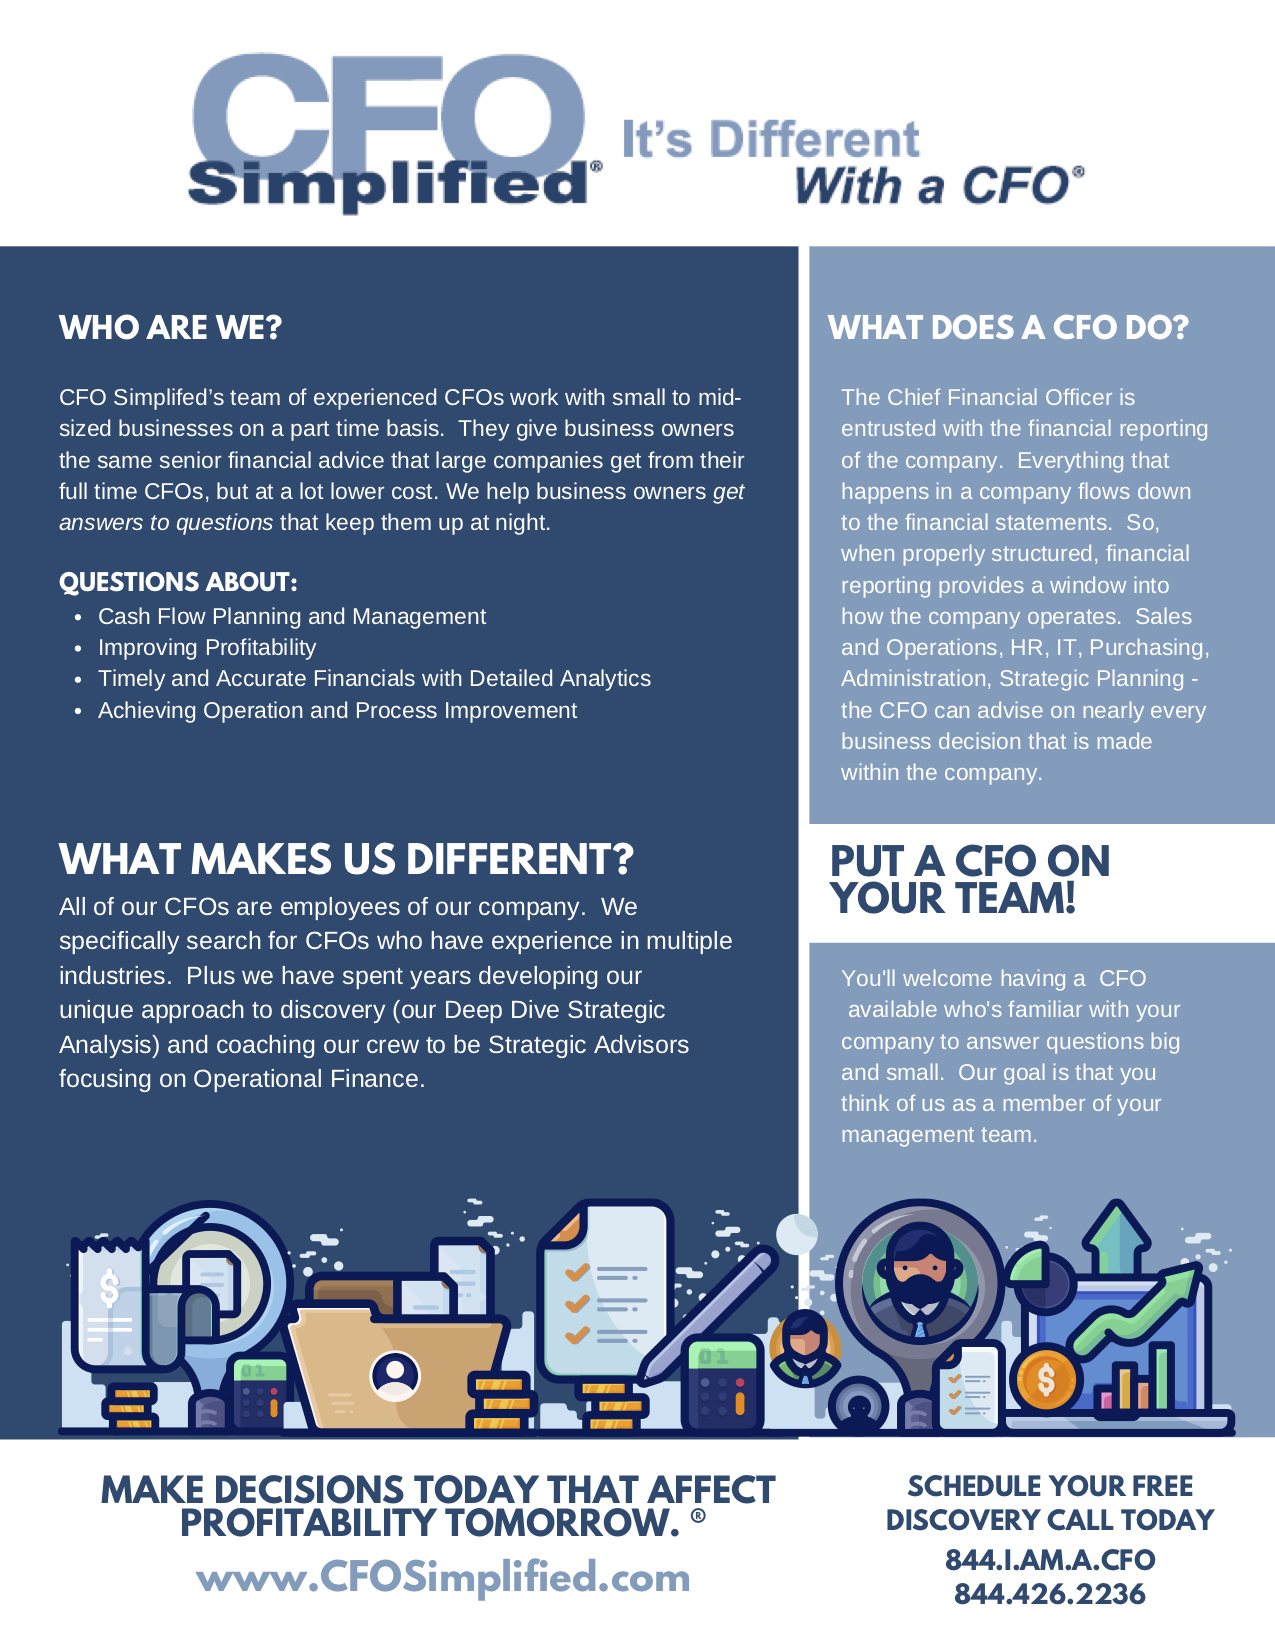 A guide to CFO Simplified representing how Chicago CFO services can benefit your company.